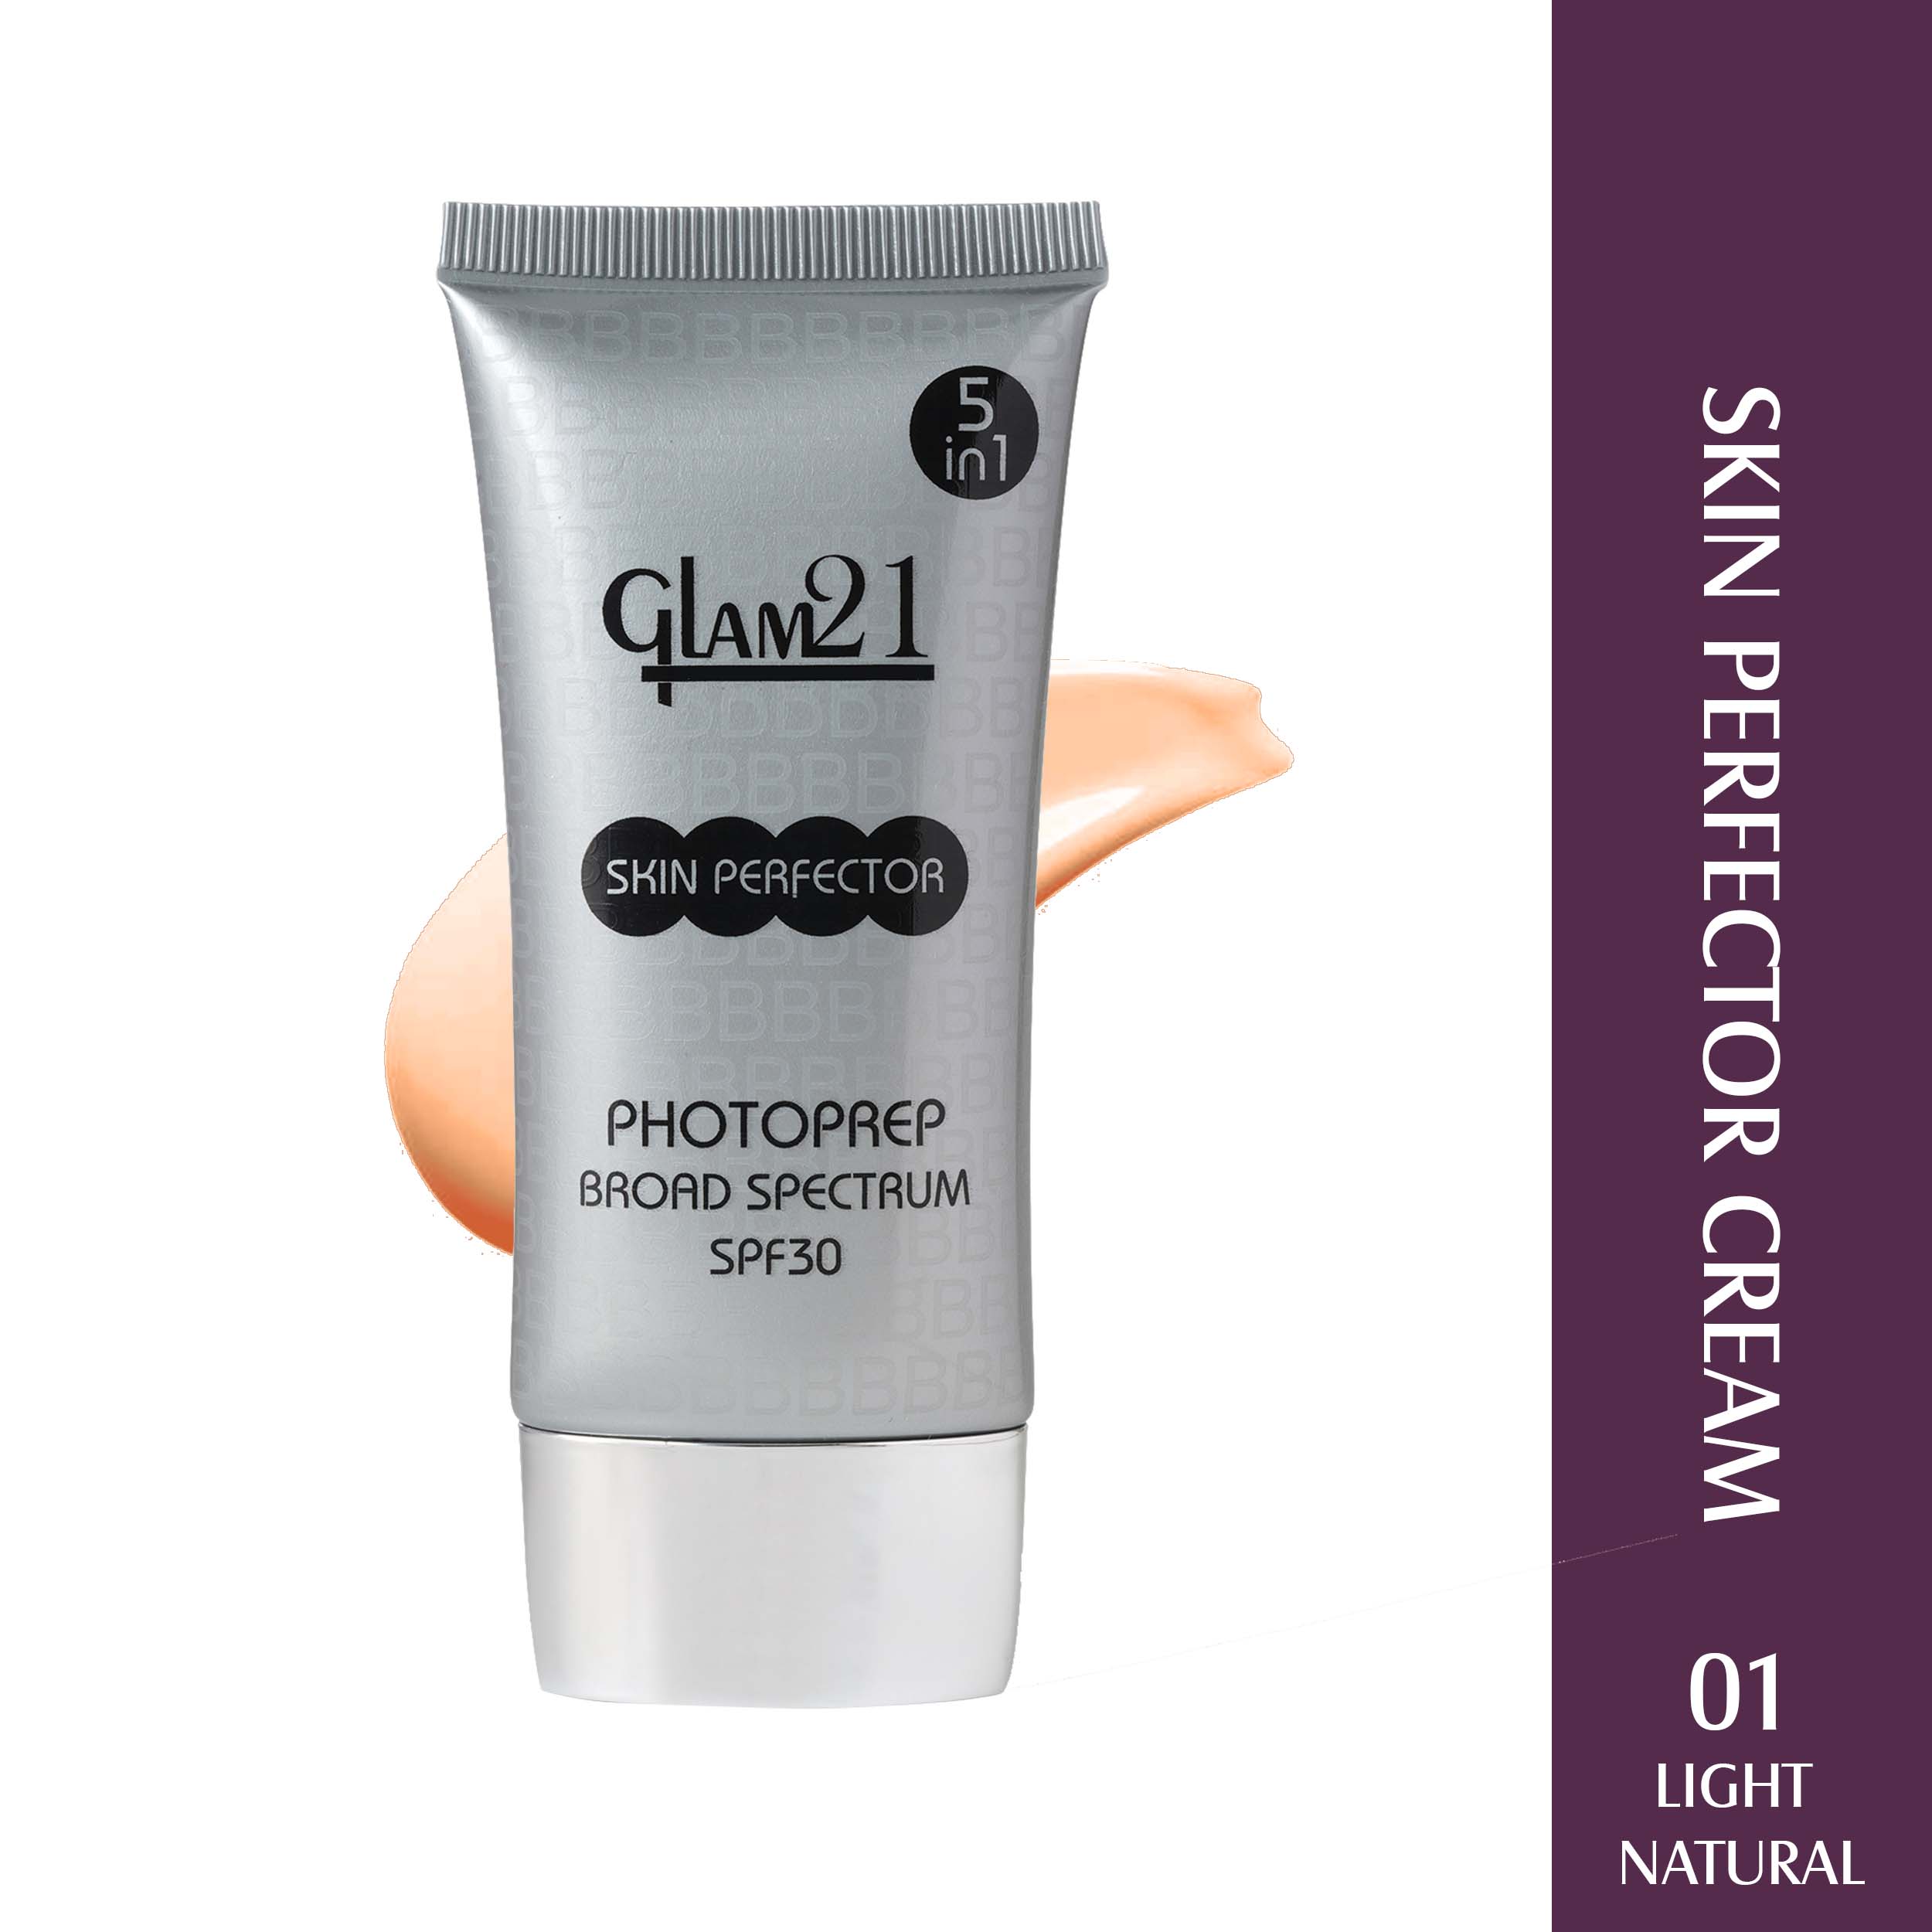 Glam21 Skin Perfector Cream with SPF30 UV Protection with Lightweight Satin Formulation Foundation, 50g (Light Natural-01)